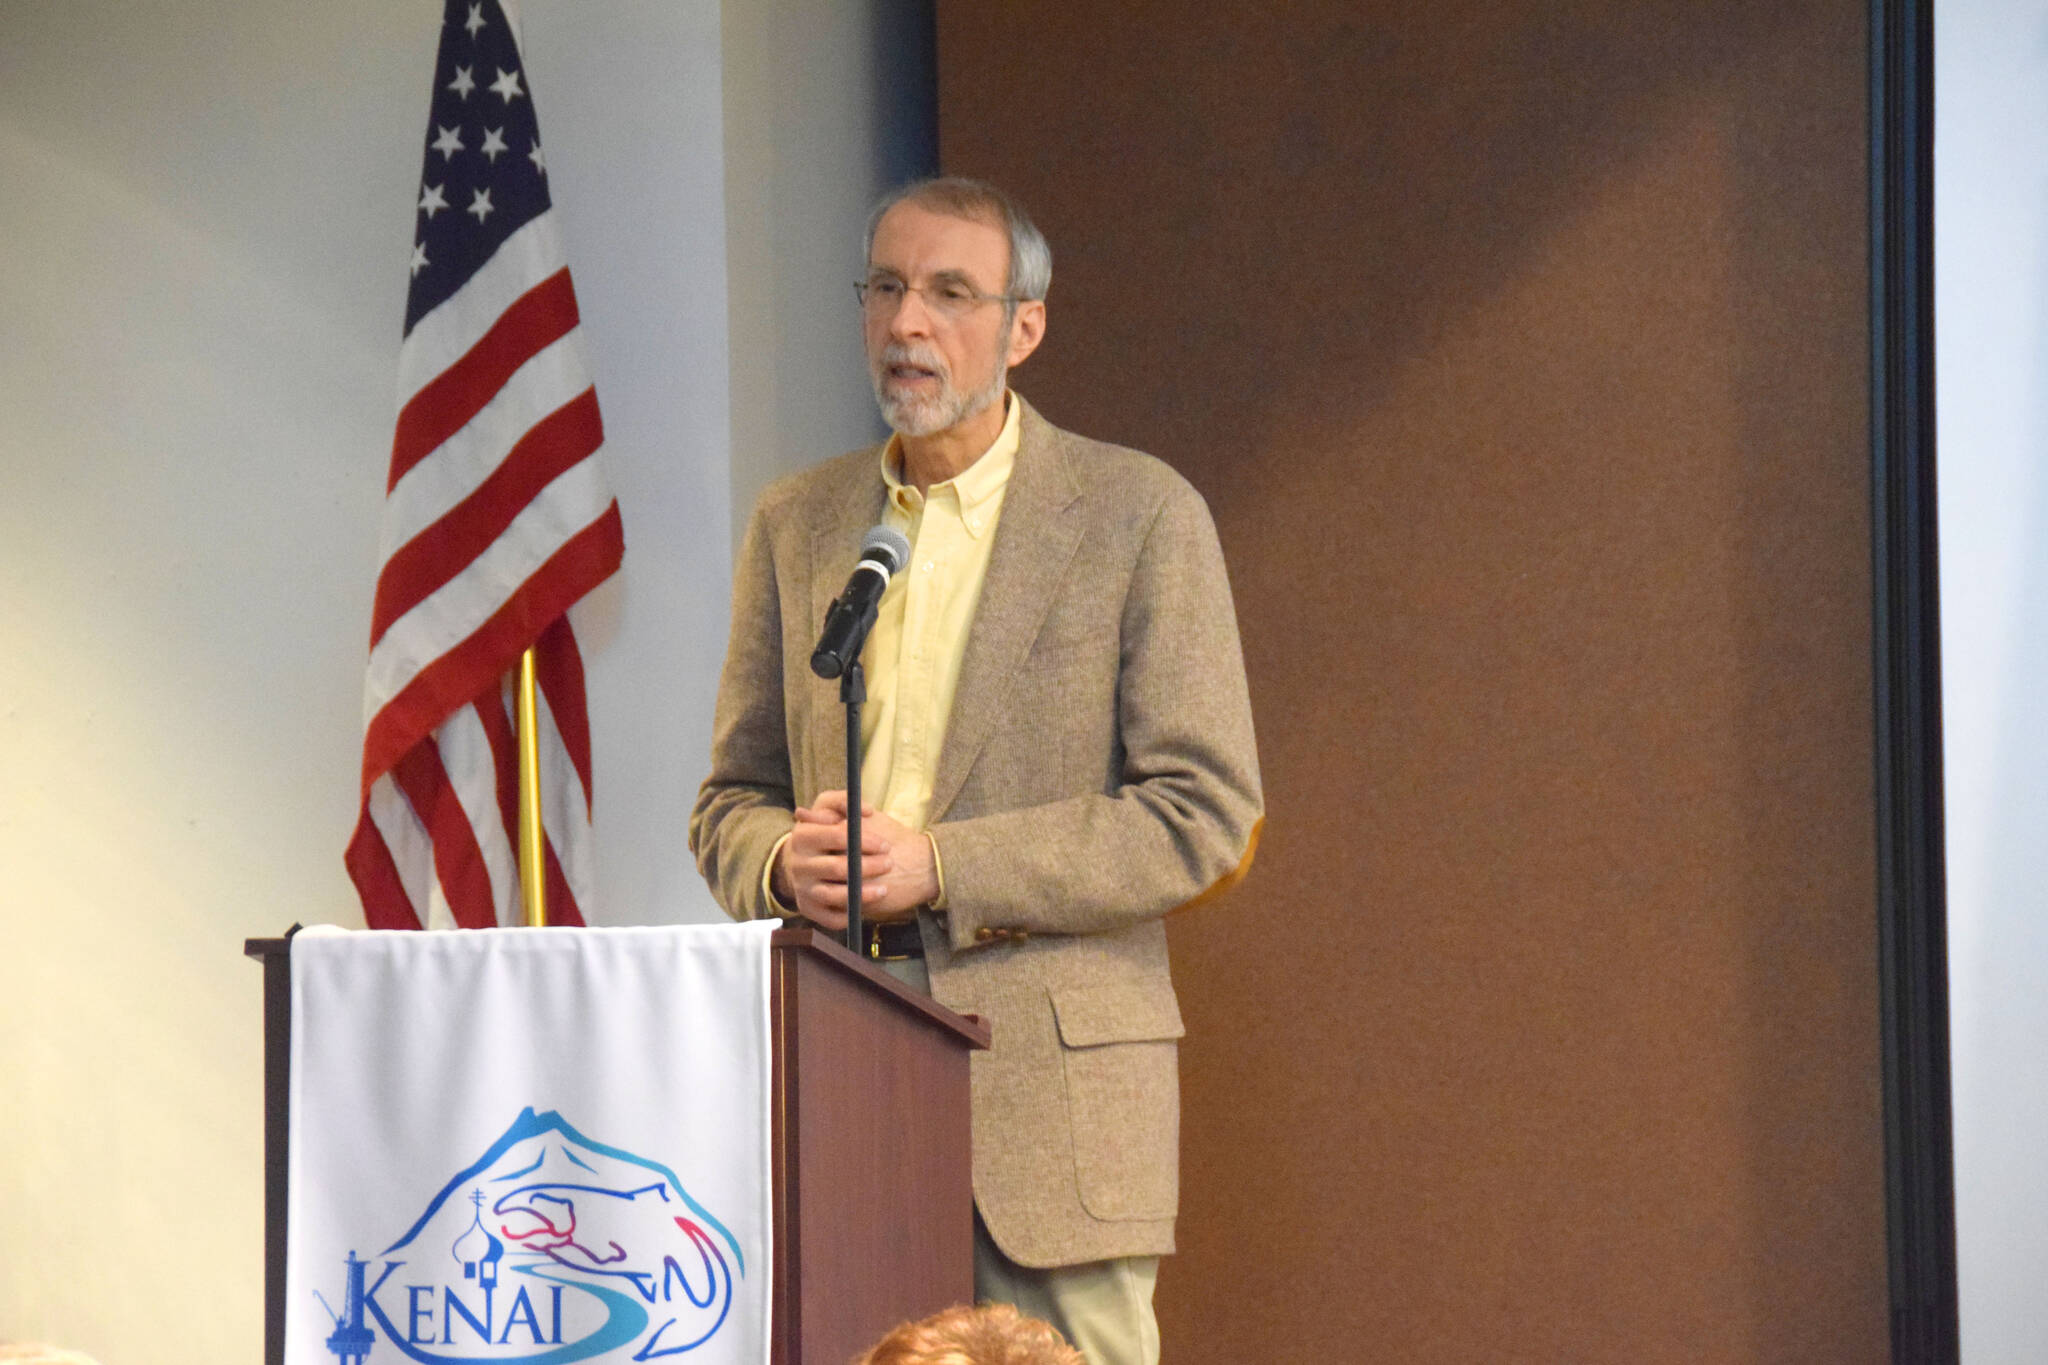 Larry Persily gives a presentation at the Kenai/Soldotna joint chamber luncheon on Wednesday, Feb. 6, 2019. (Photo by Brian Mazurek/Peninsula Clarion file)